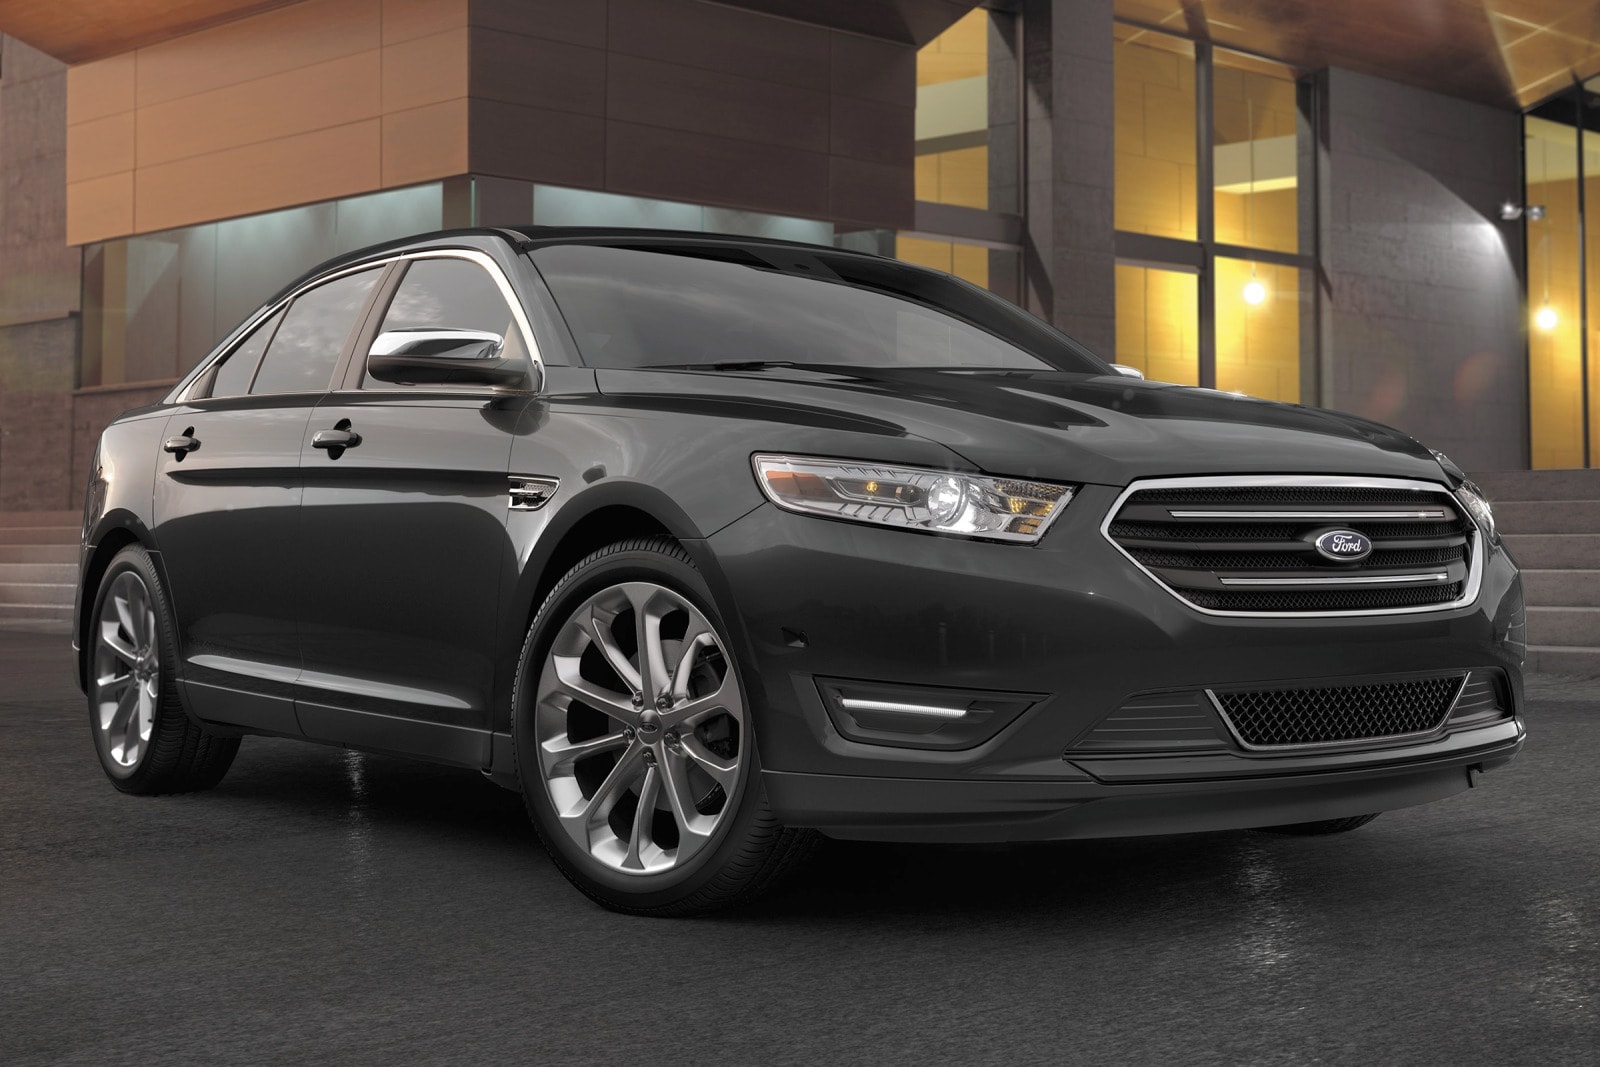 Ford Taurus Sho 2010 Pictures Information Specs